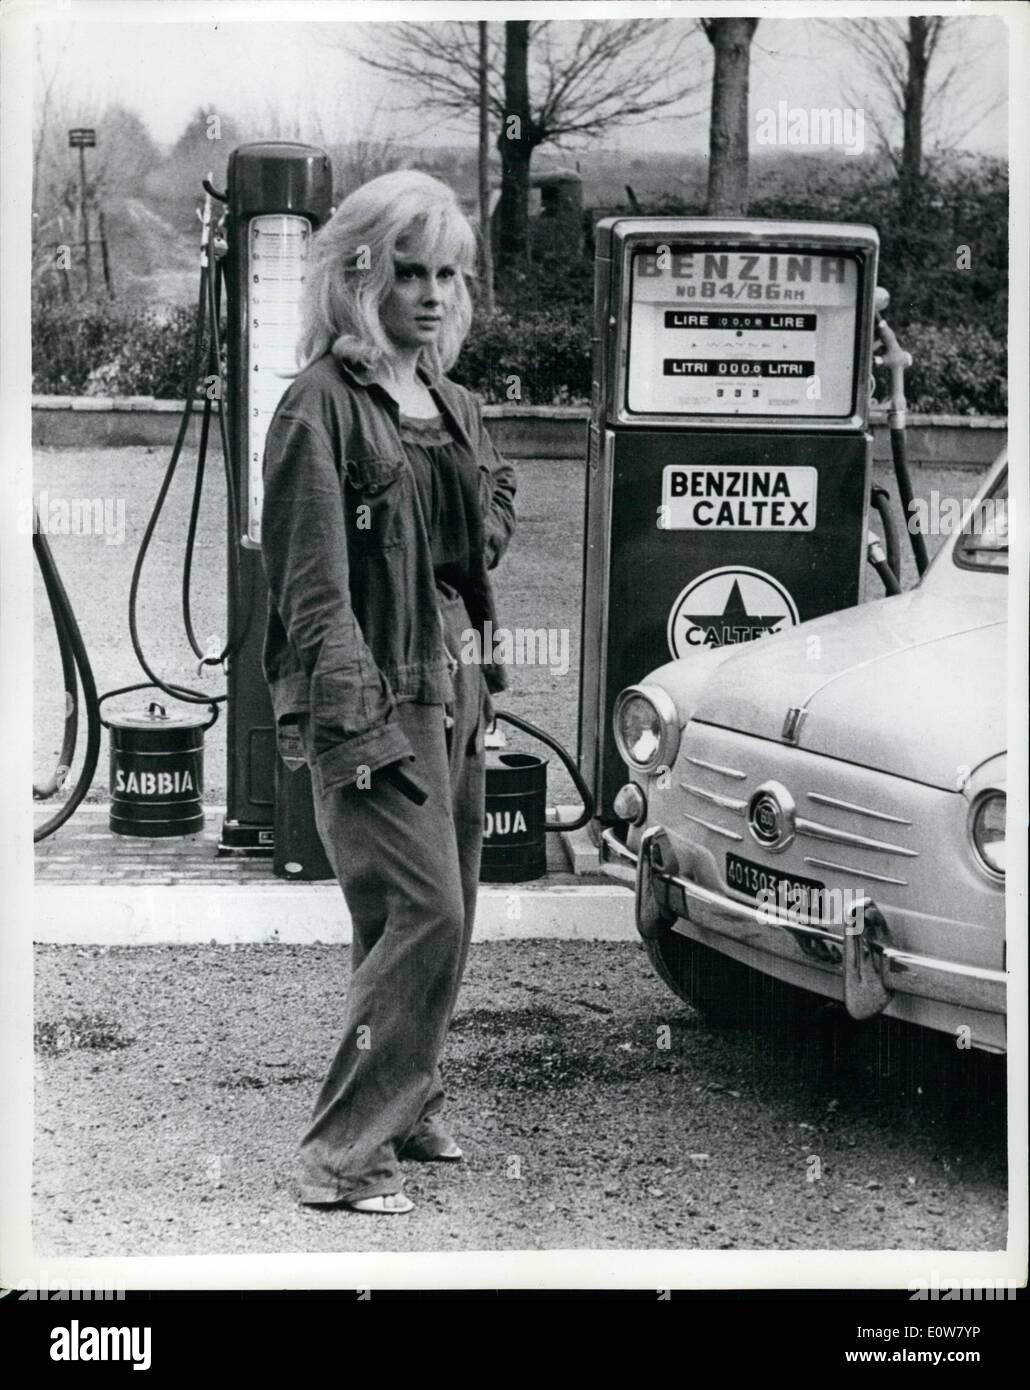 Jan. 01, 1962 - A Blonde Gina Lollobrigida plays ''Benzinara'' in new Italian Film: Gina Lollobrigida plays the role of a ''Benzinara'', a service station attendant, in a new film ''The Ippolita's Beauties'', which is currently being made in Italy. Photo Shows Gina Lollobrigida as she appears in the film. Stock Photo